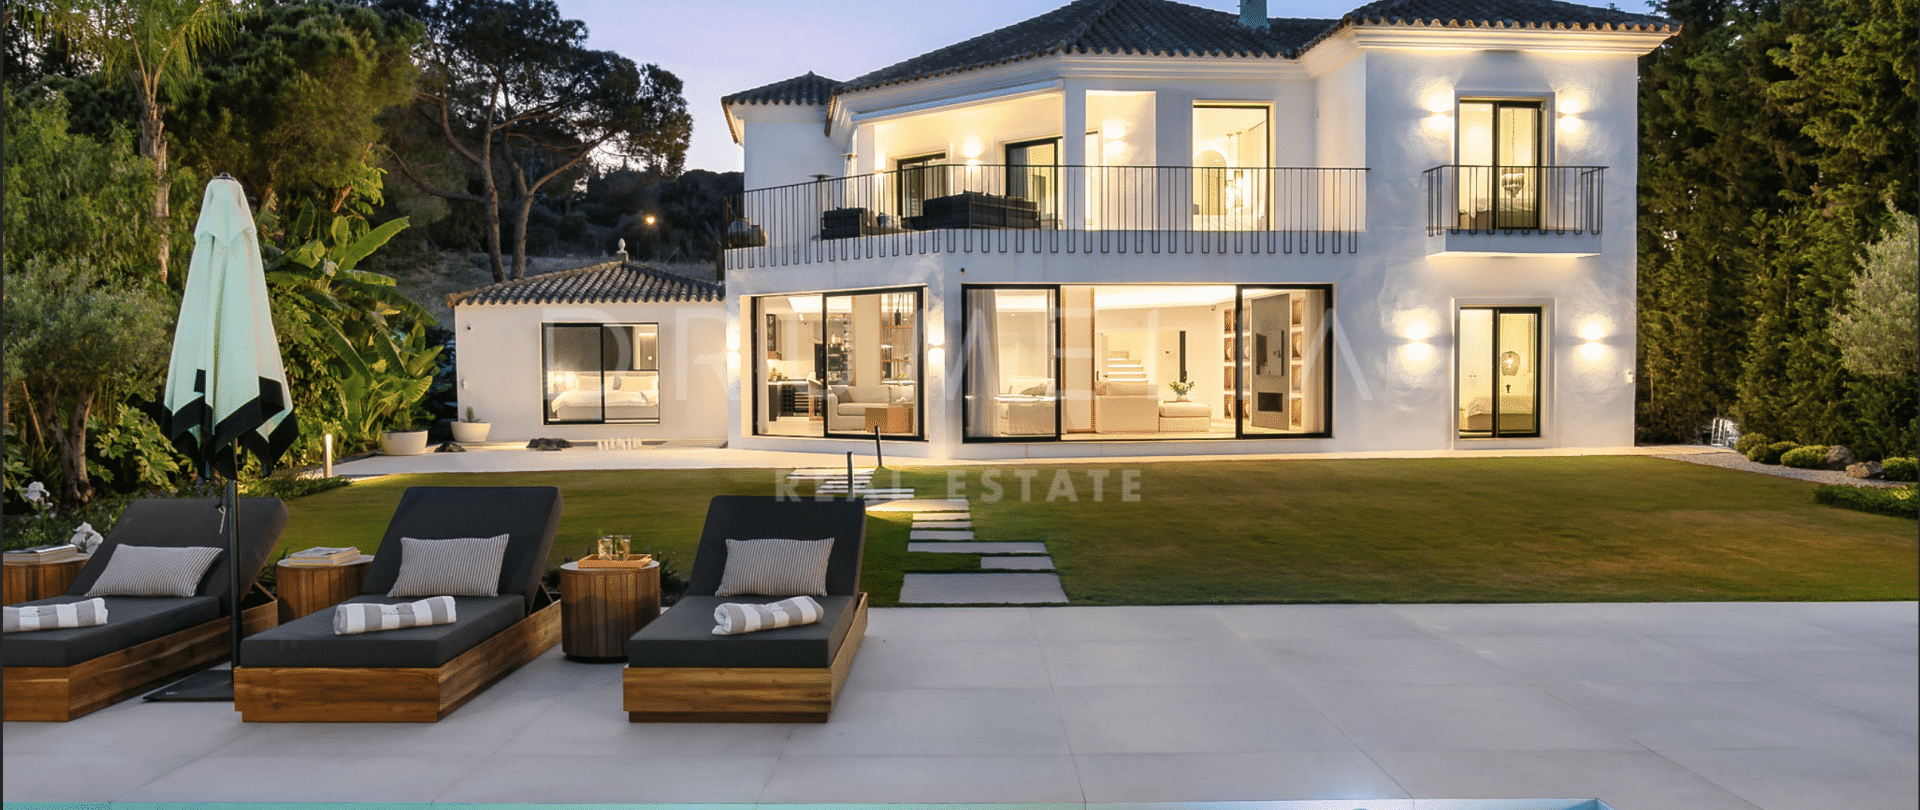 Sophisticated and stylish high-end modern villa in beautiful Nueva Andalucía, Marbella